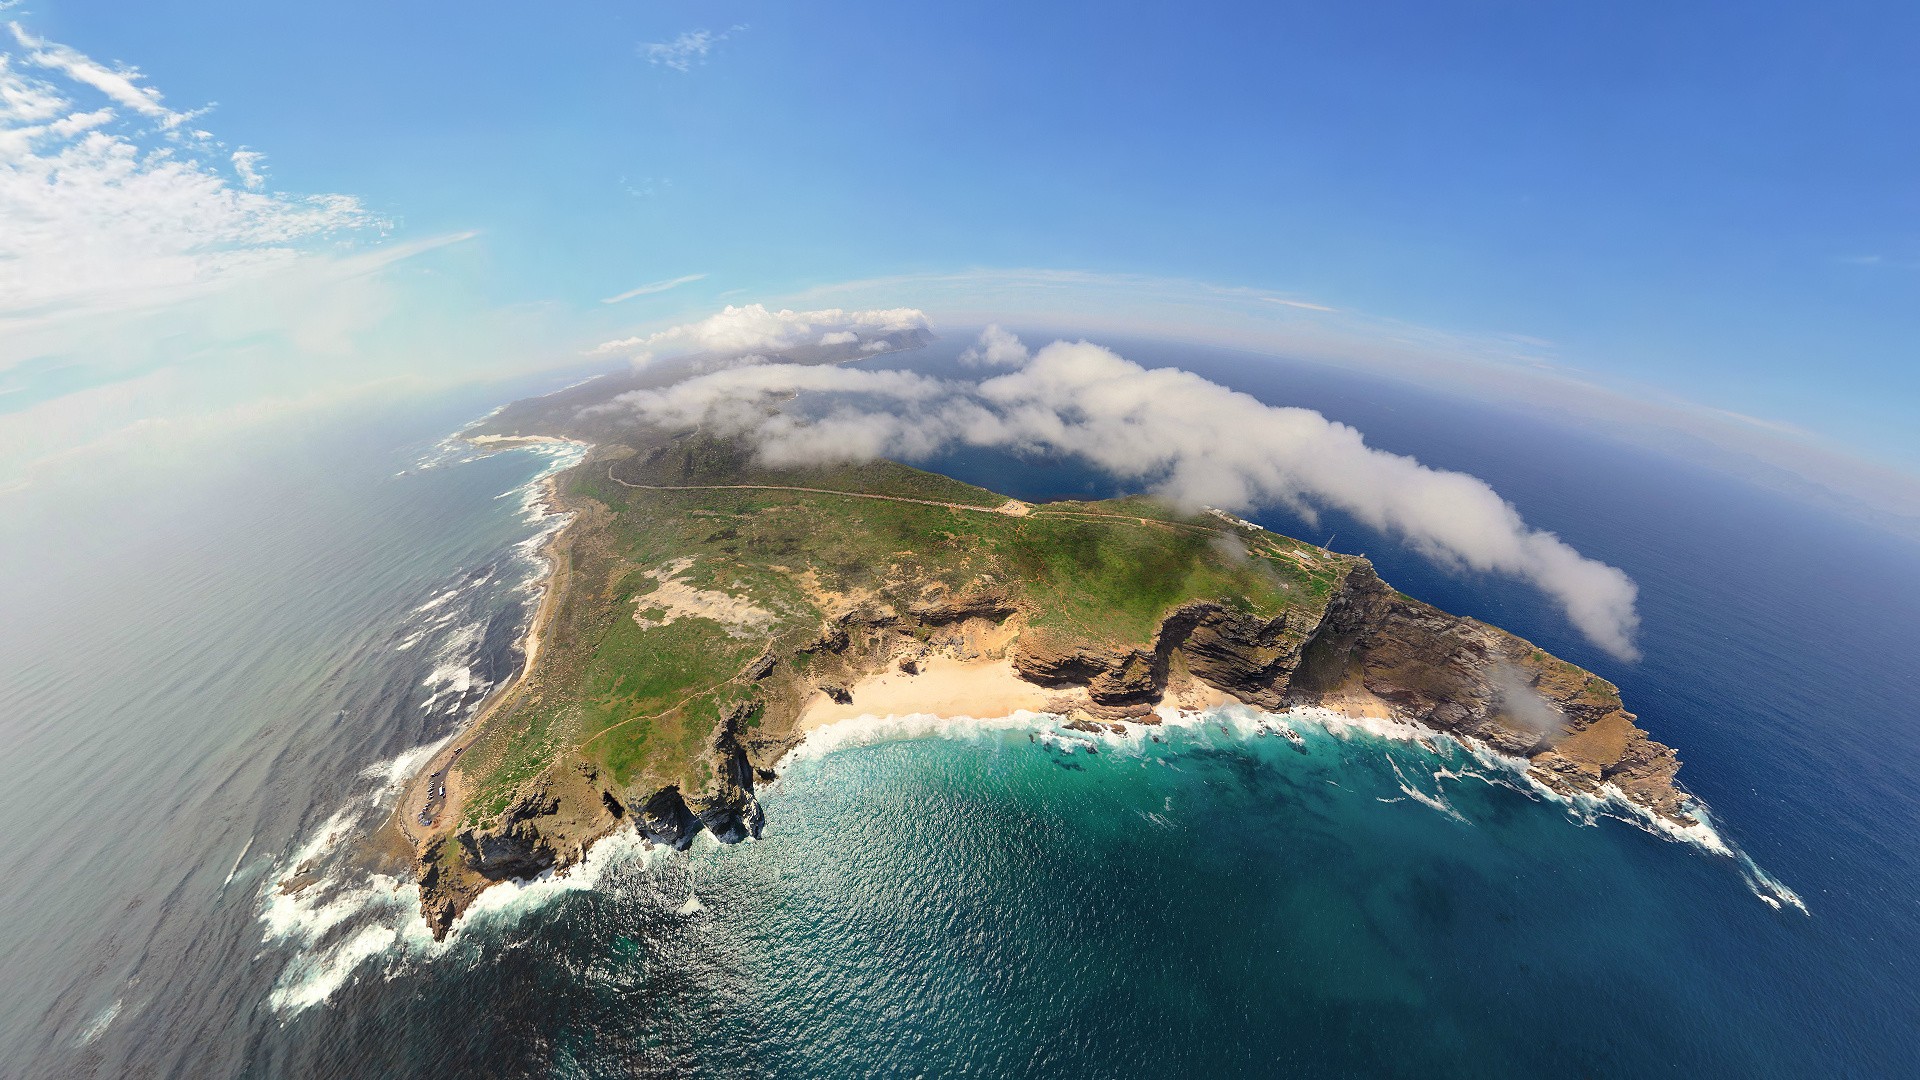 Nature Landscape Mountains Aerial View Sea Clouds Island Waves Cliff Africa GoPro Fisheye Lens 1920x1080